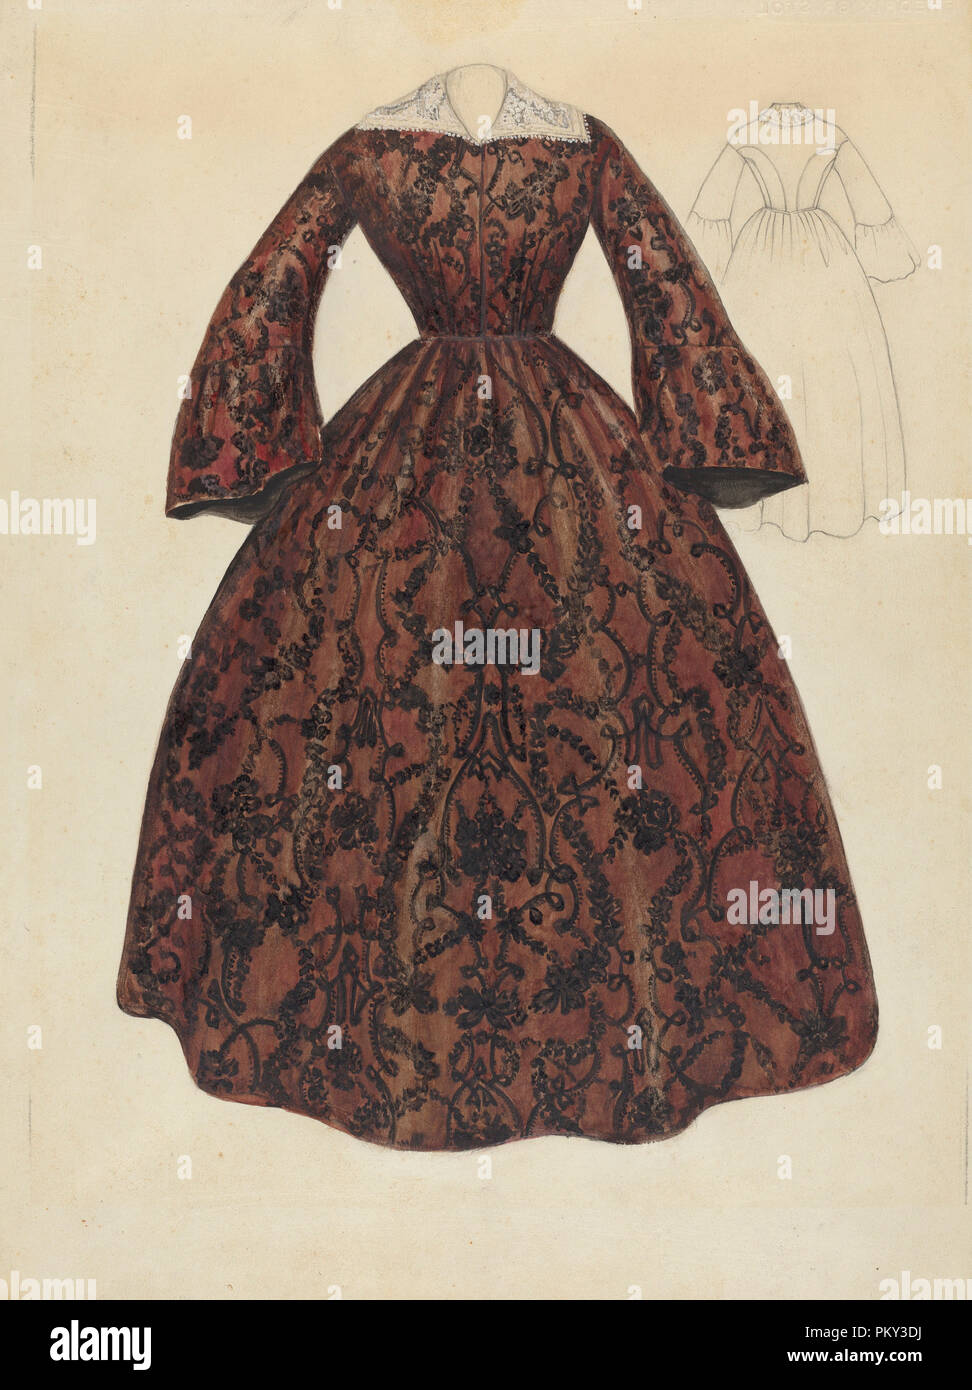 Dress. Dated: c. 1939. Dimensions: overall: 30.2 x 22.8 cm (11 7/8 x 9 in.). Medium: watercolor, graphite, and pen and ink on paper. Museum: National Gallery of Art, Washington DC. Author: Jessie M. Benge. Stock Photo